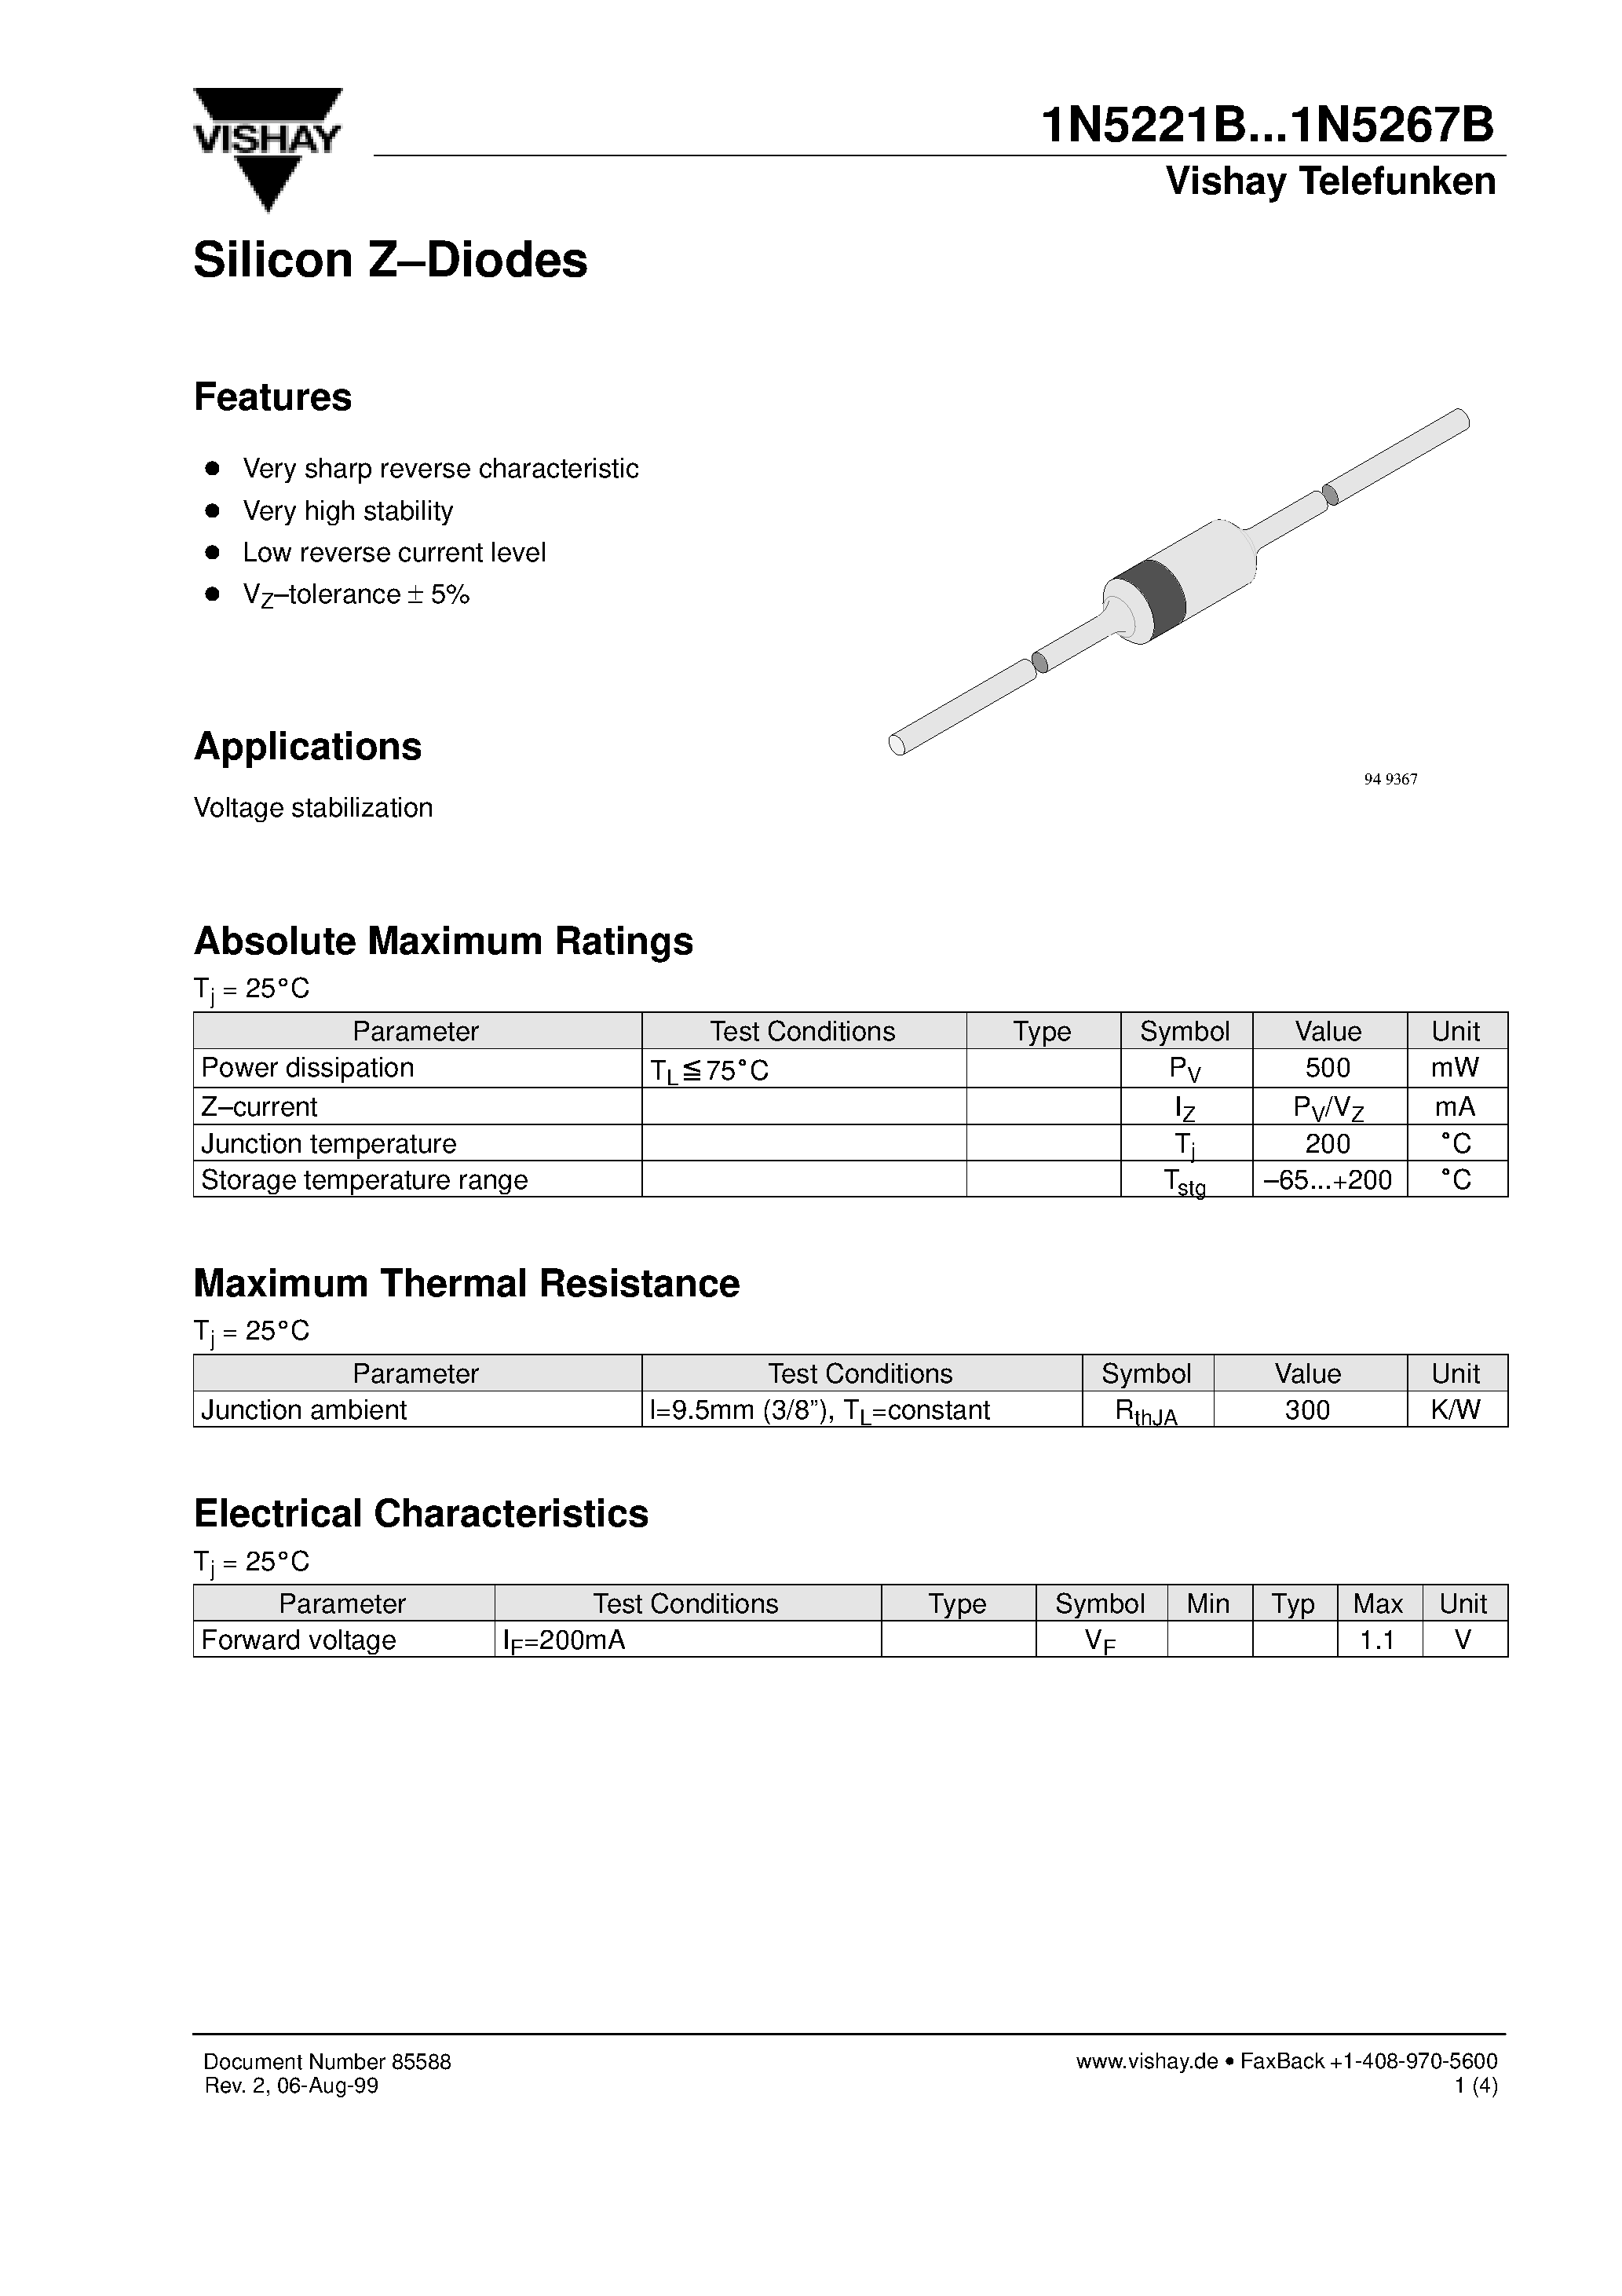 Datasheet 1N5252B - Silicon Z-Diodes page 1